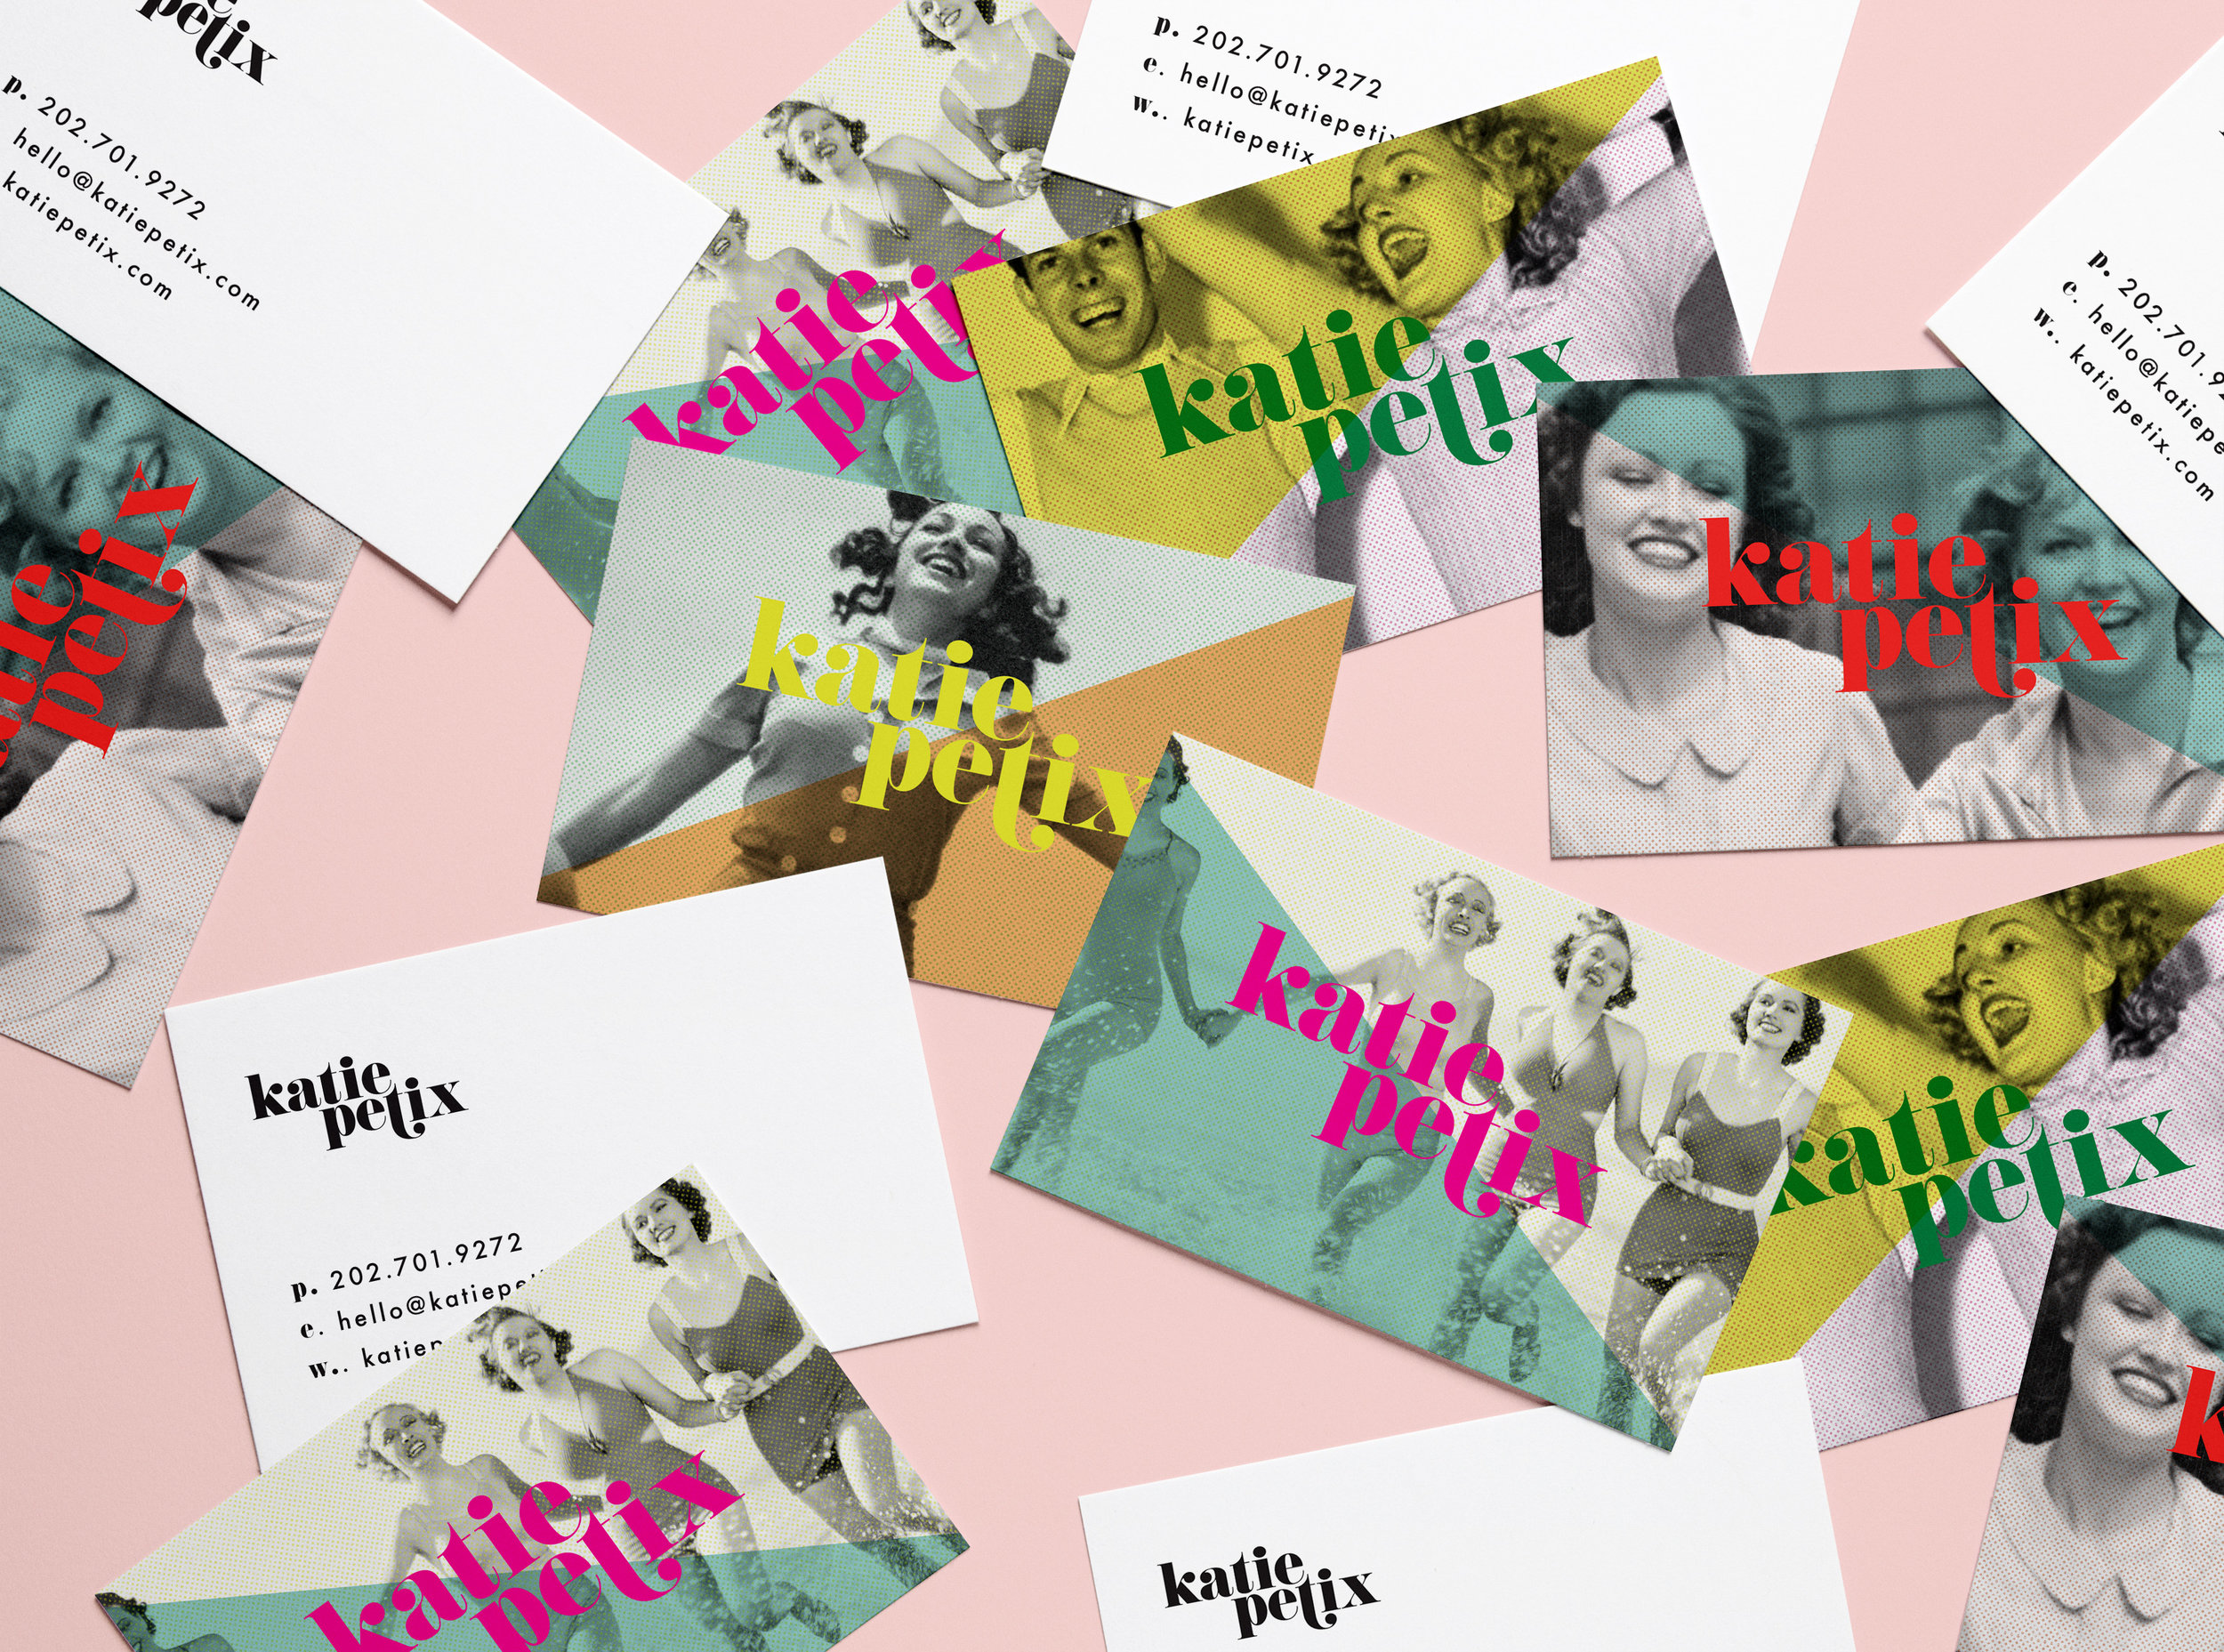 Color Neon and Vintage Imagery Inspired Branding for Social Media Manager Katie Petix